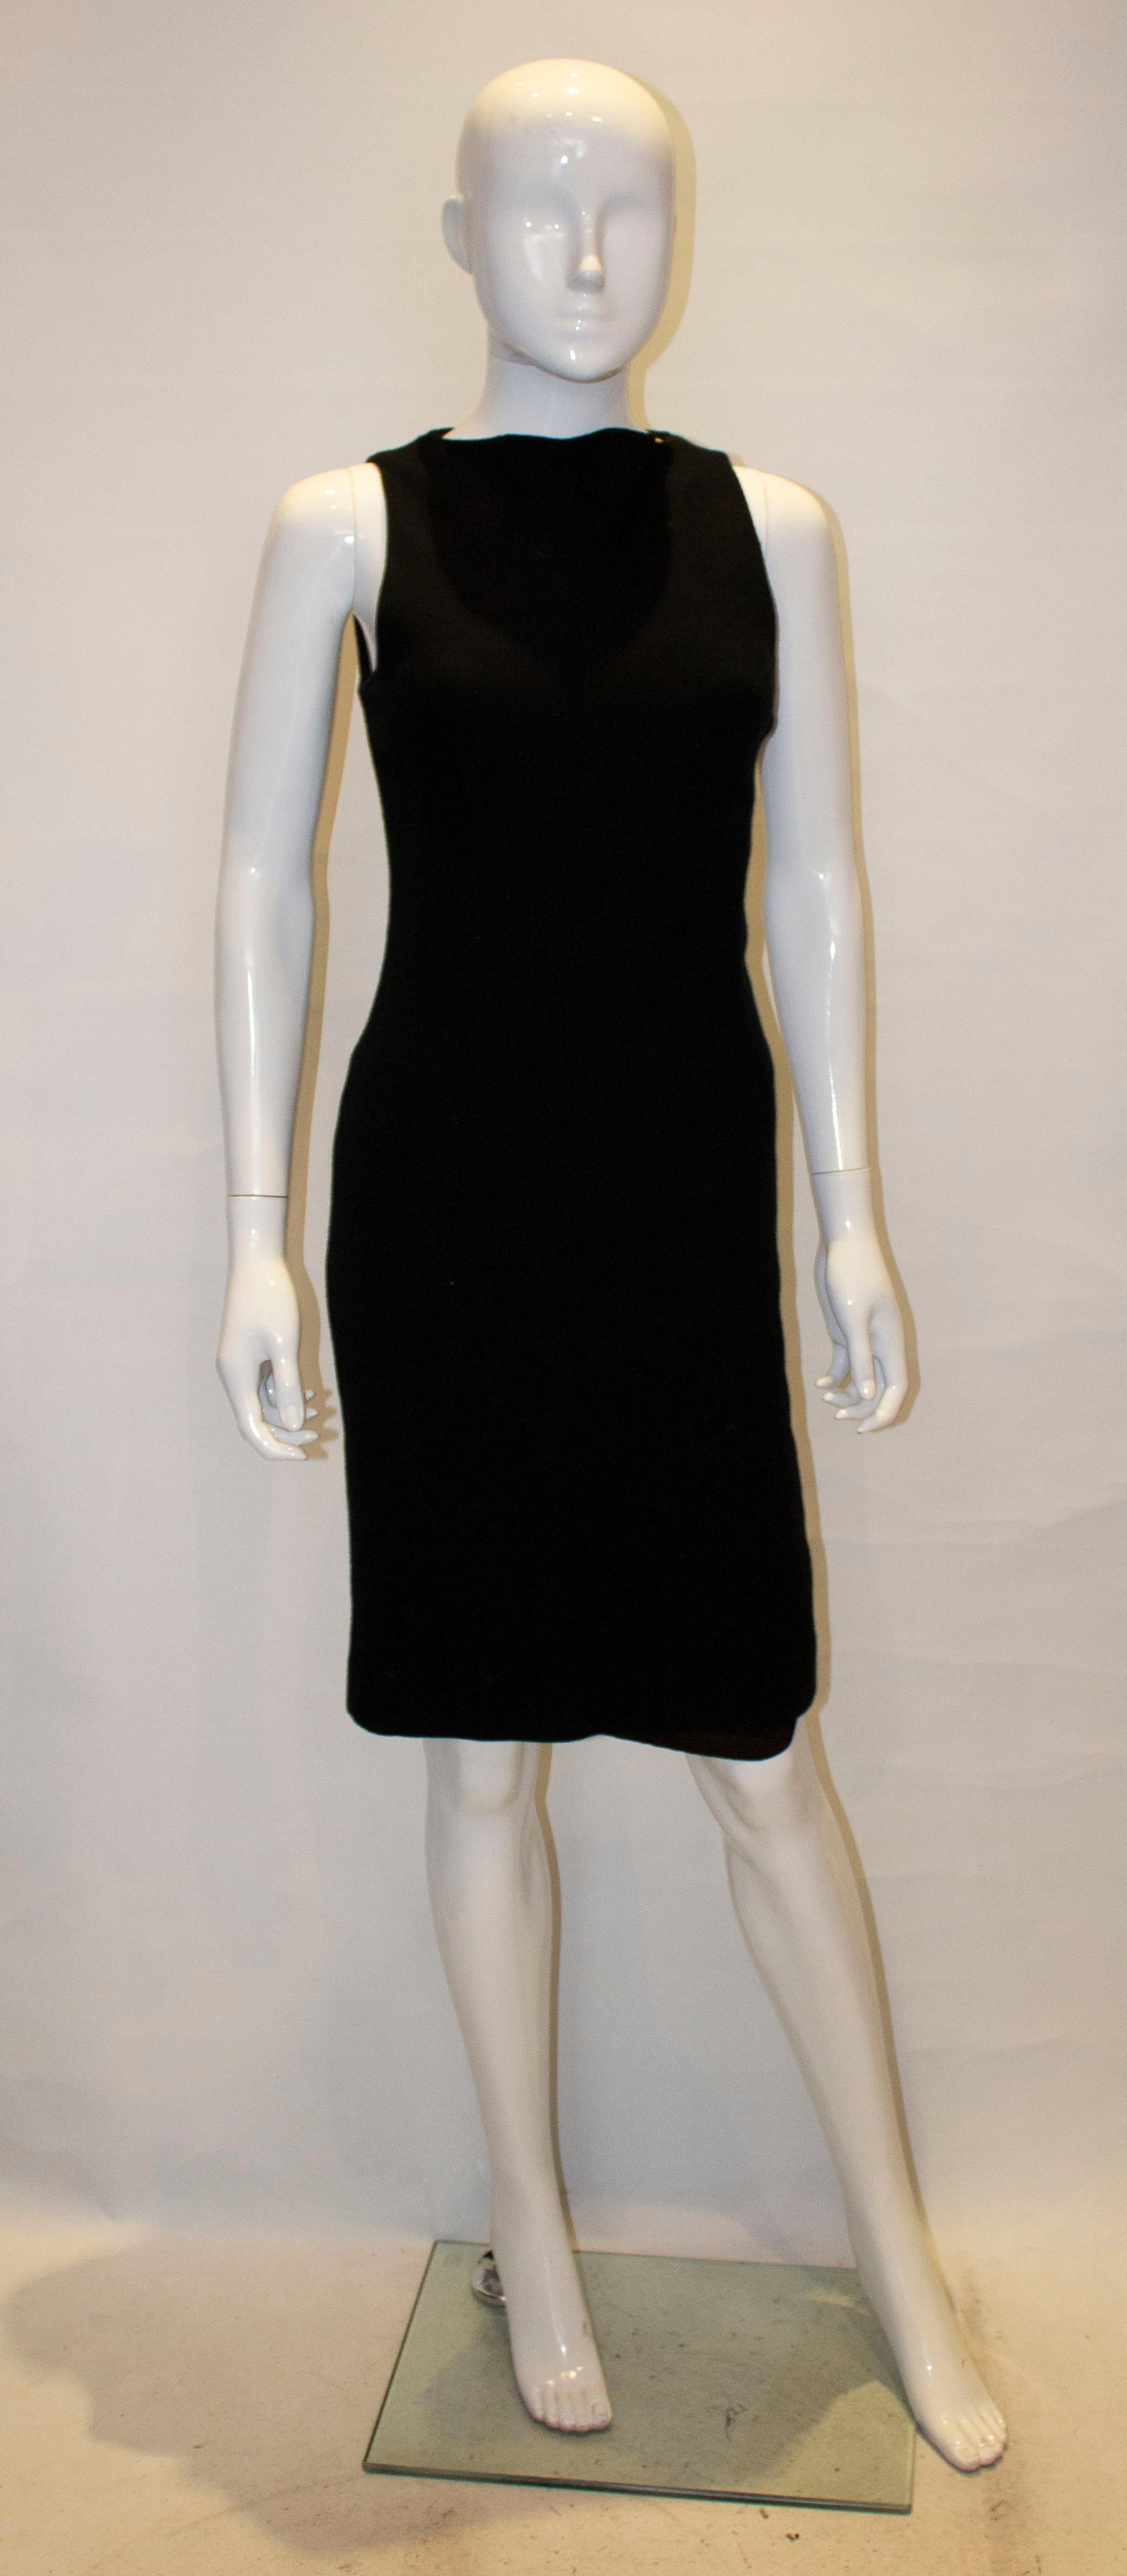 A chic black wool shift dress by Nina Ricci, Paris. The dress is 100% wool, and fully lined.